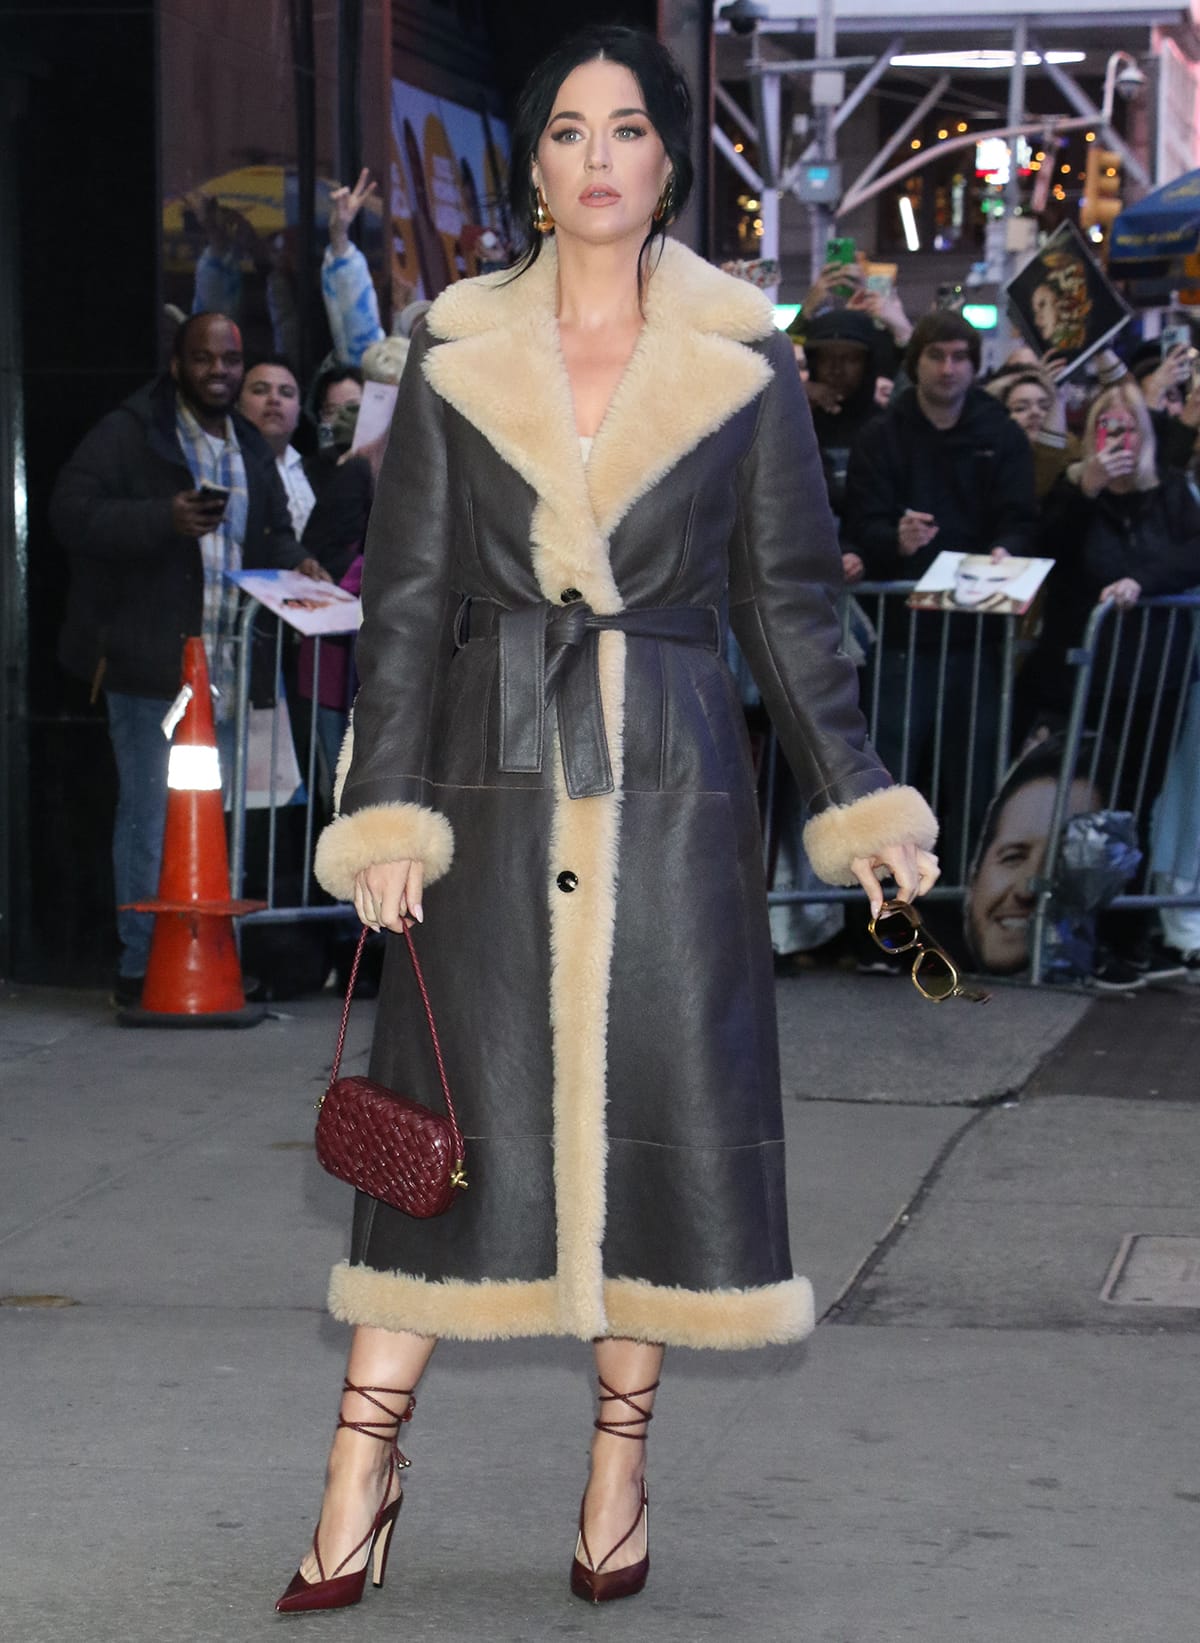 Katy Perry kicks off her day with a guest appearance on Good Morning America wearing a Bottega Veneta brown leather shearling-trimmed coat and a burgundy mini dress underneath